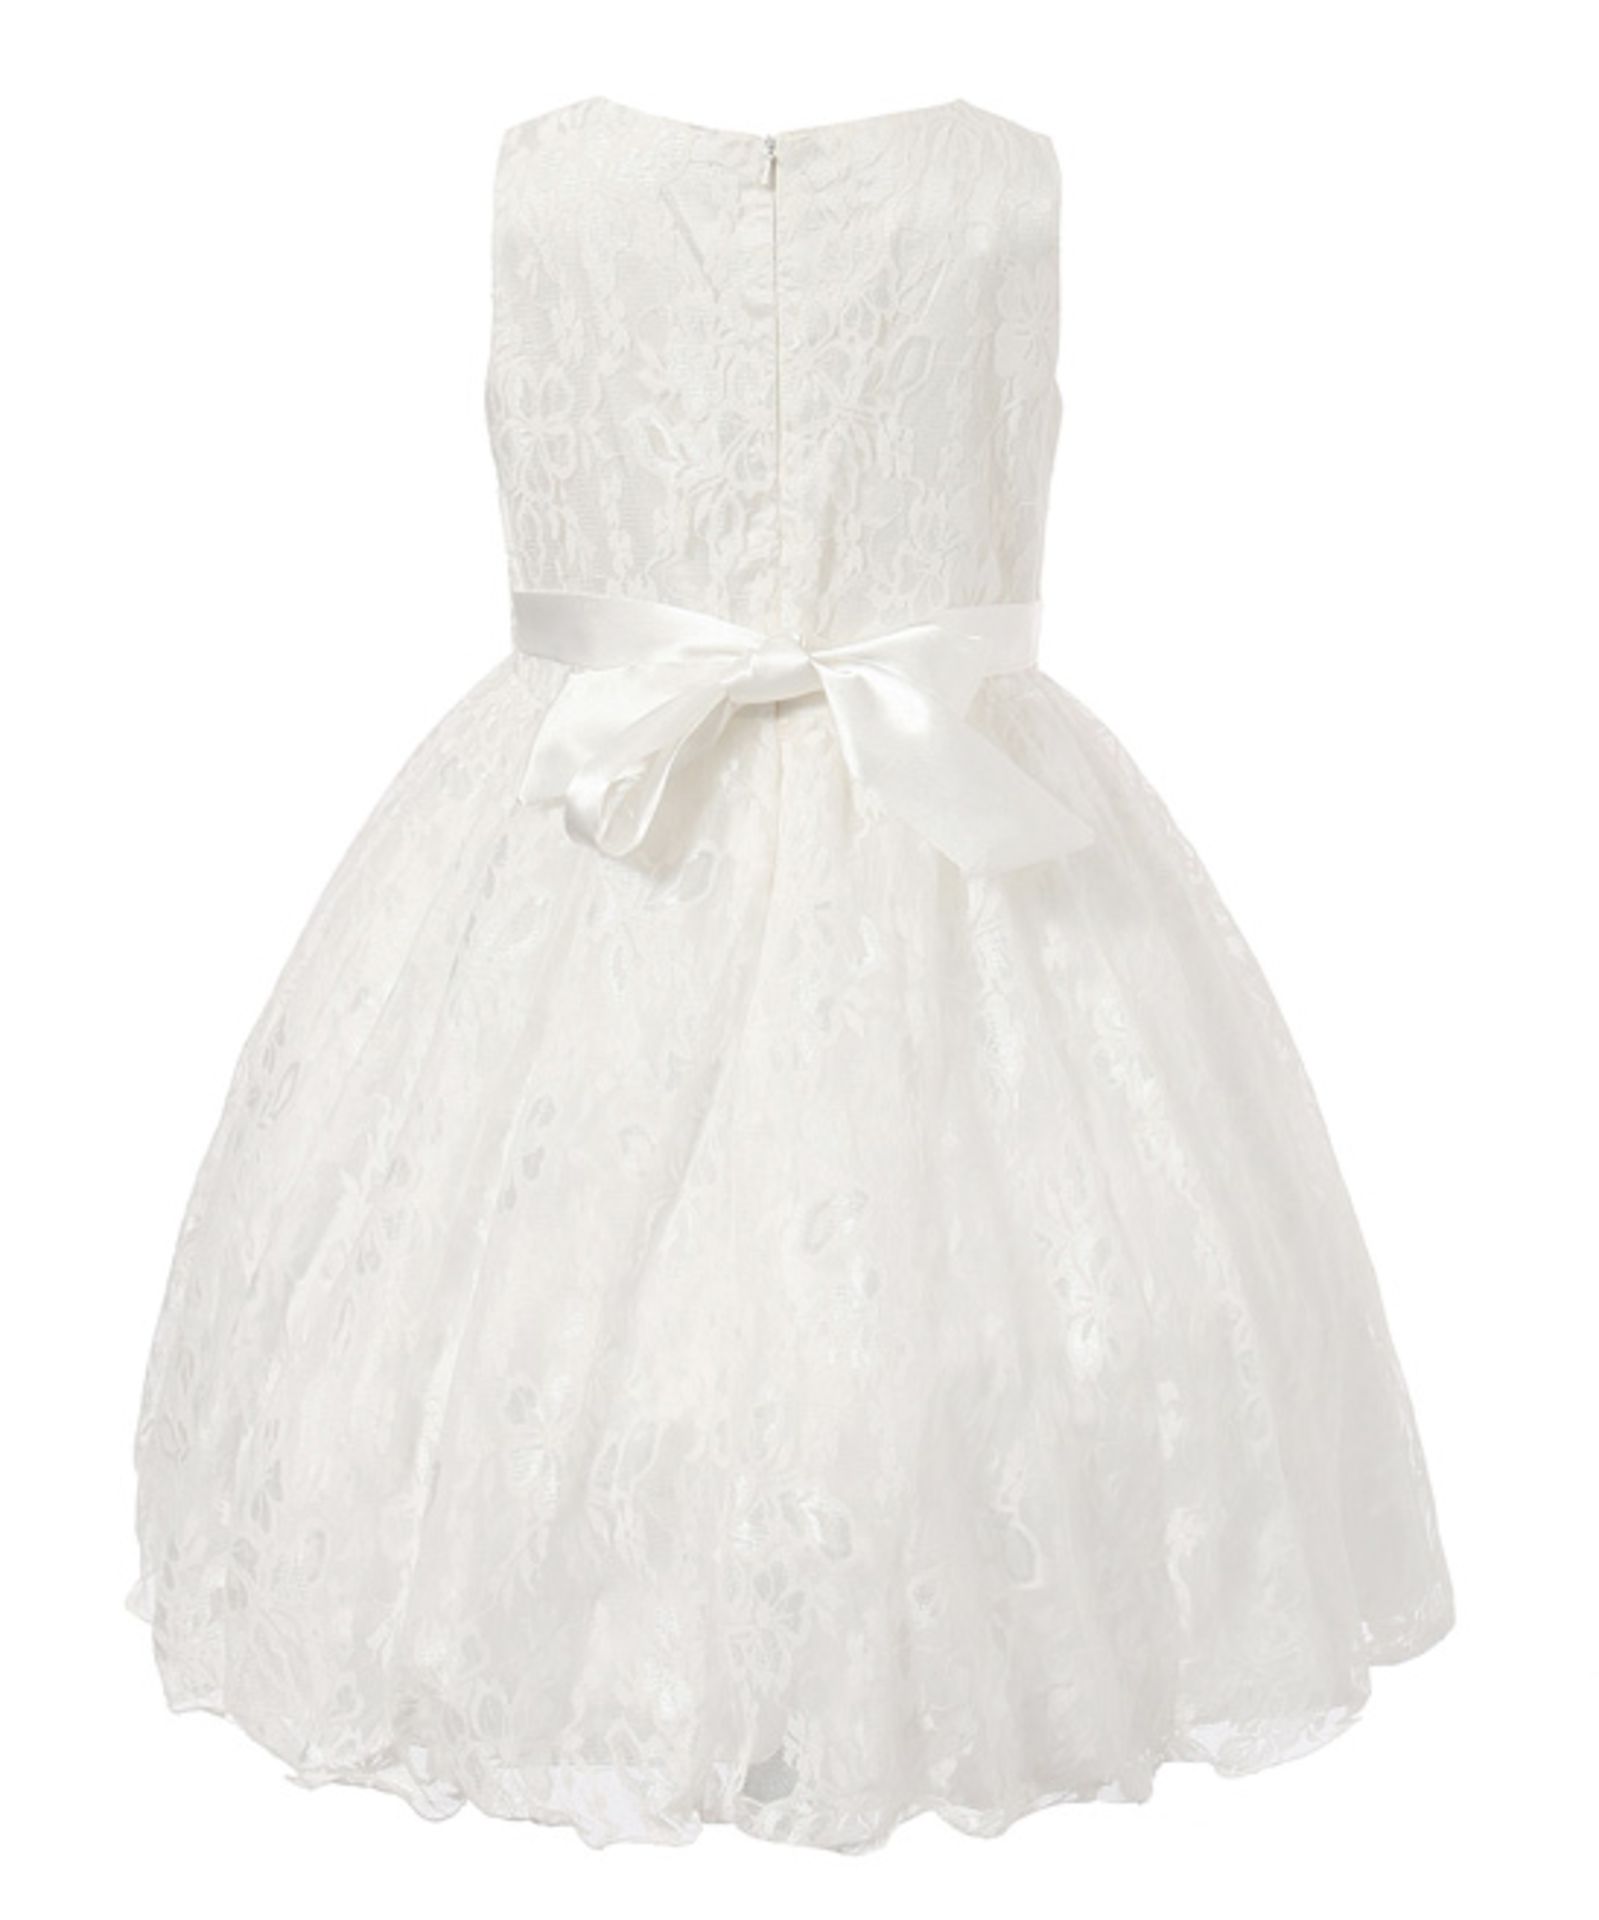 White Floral Lace Layered A-Line Dress - Toddler & Girls - Image 2 of 2